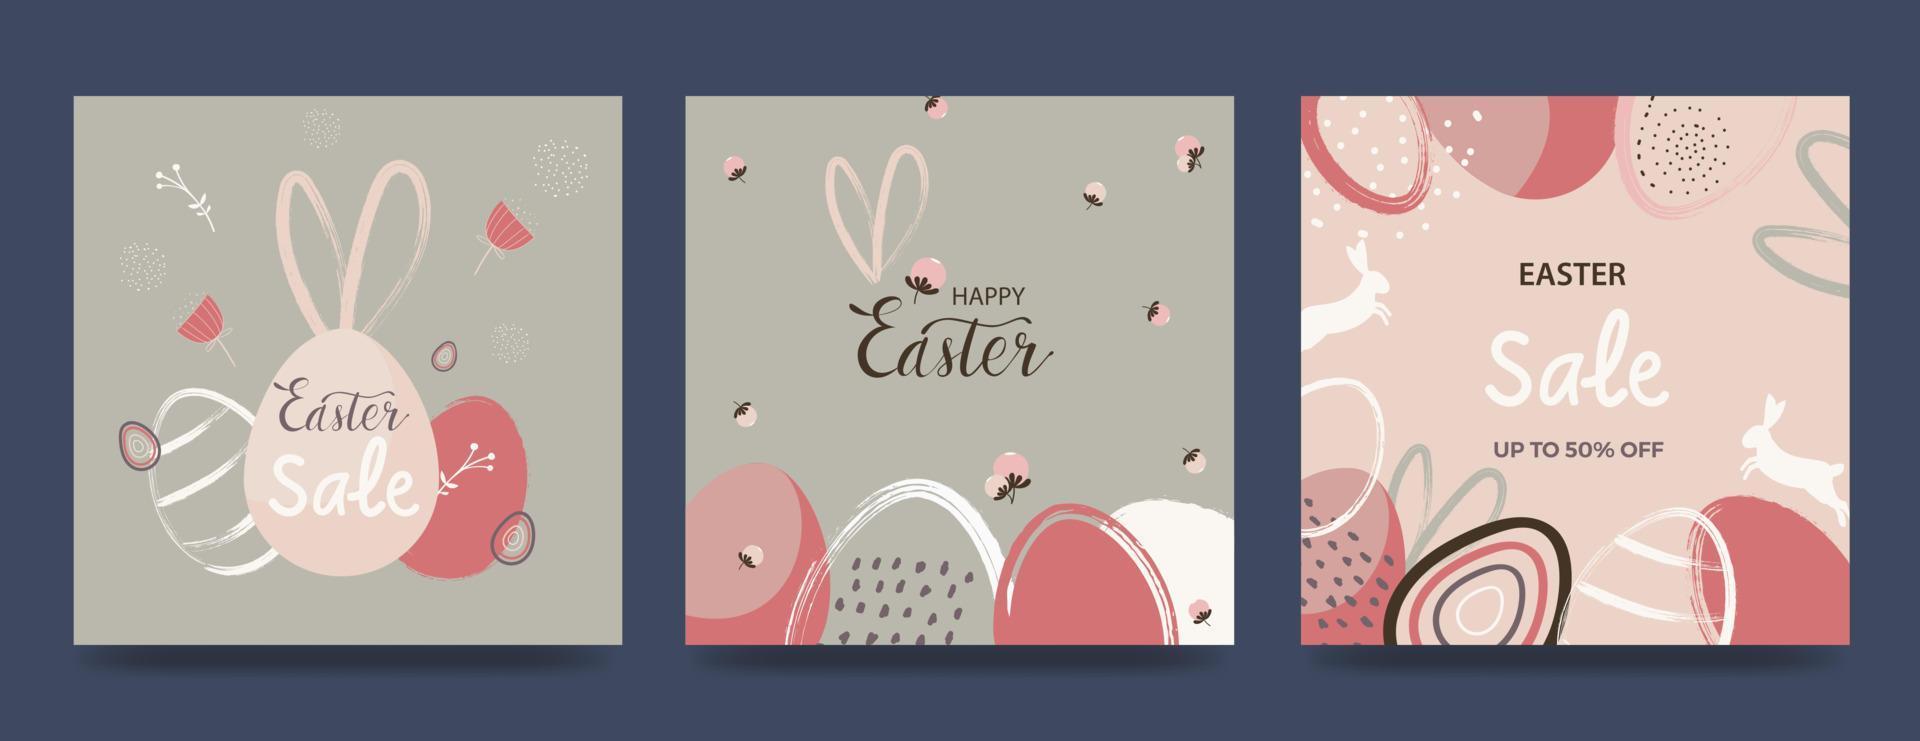 Happy Easter banner. Trendy Easter design with typography, hand drawn strokes and eggs, bunny ears, flowers in pastel colors. Modern minimalist style. Vector illustration